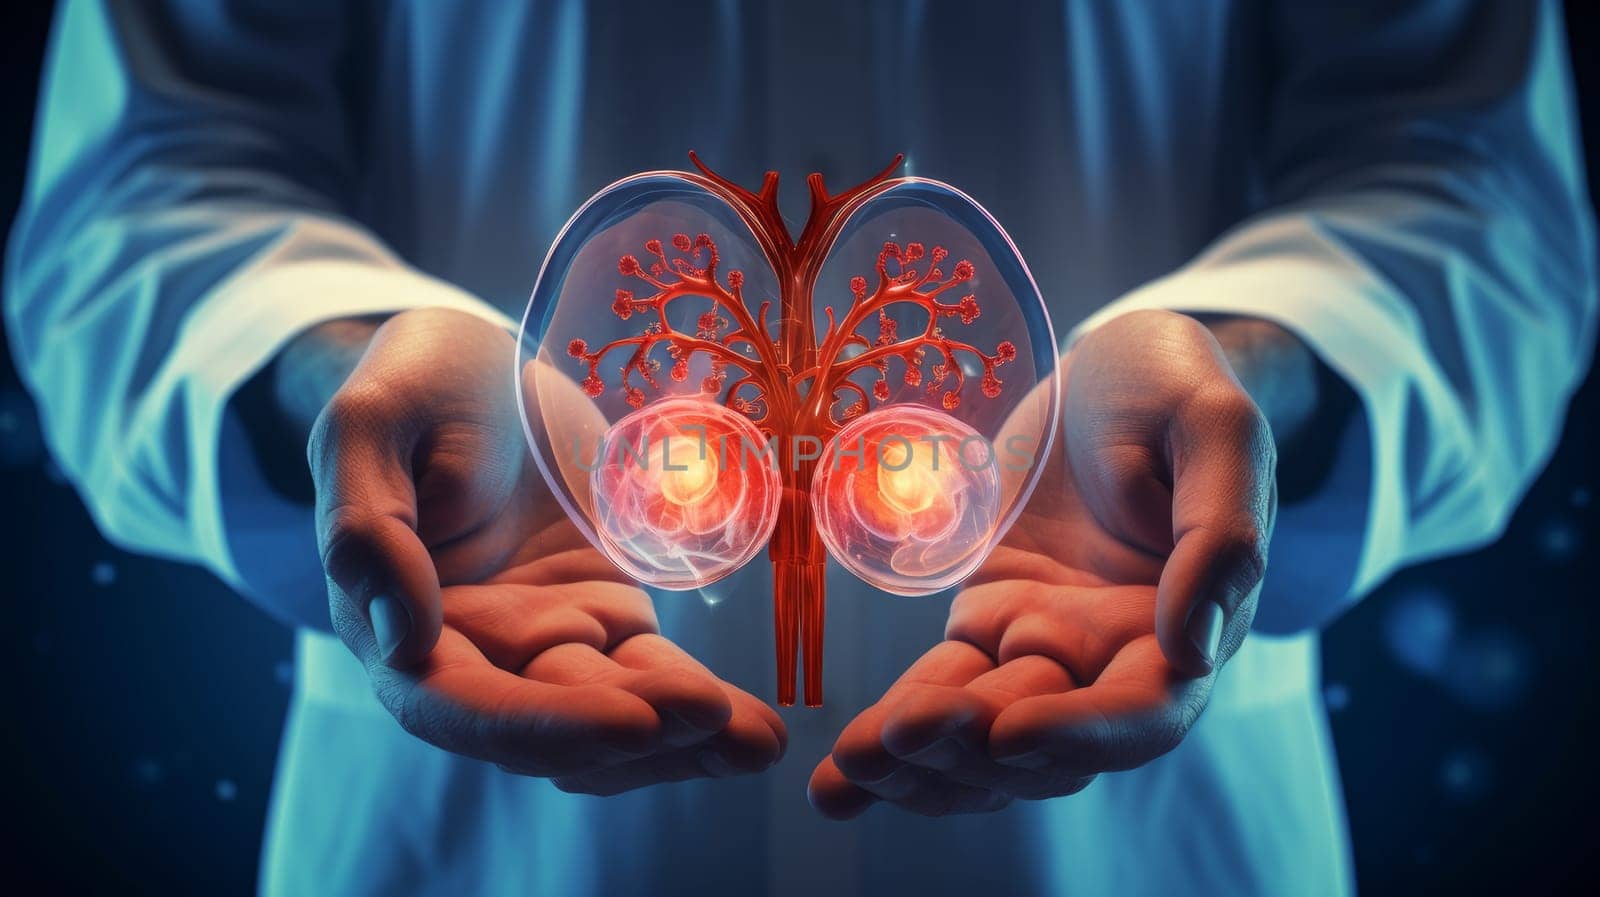 Female doctor touchstone virtual Heart in hand. Blurred photo, handrawn human organ, highlighted red as symbol of disease. Healthcare hospital service concept stock photo by Alla_Yurtayeva